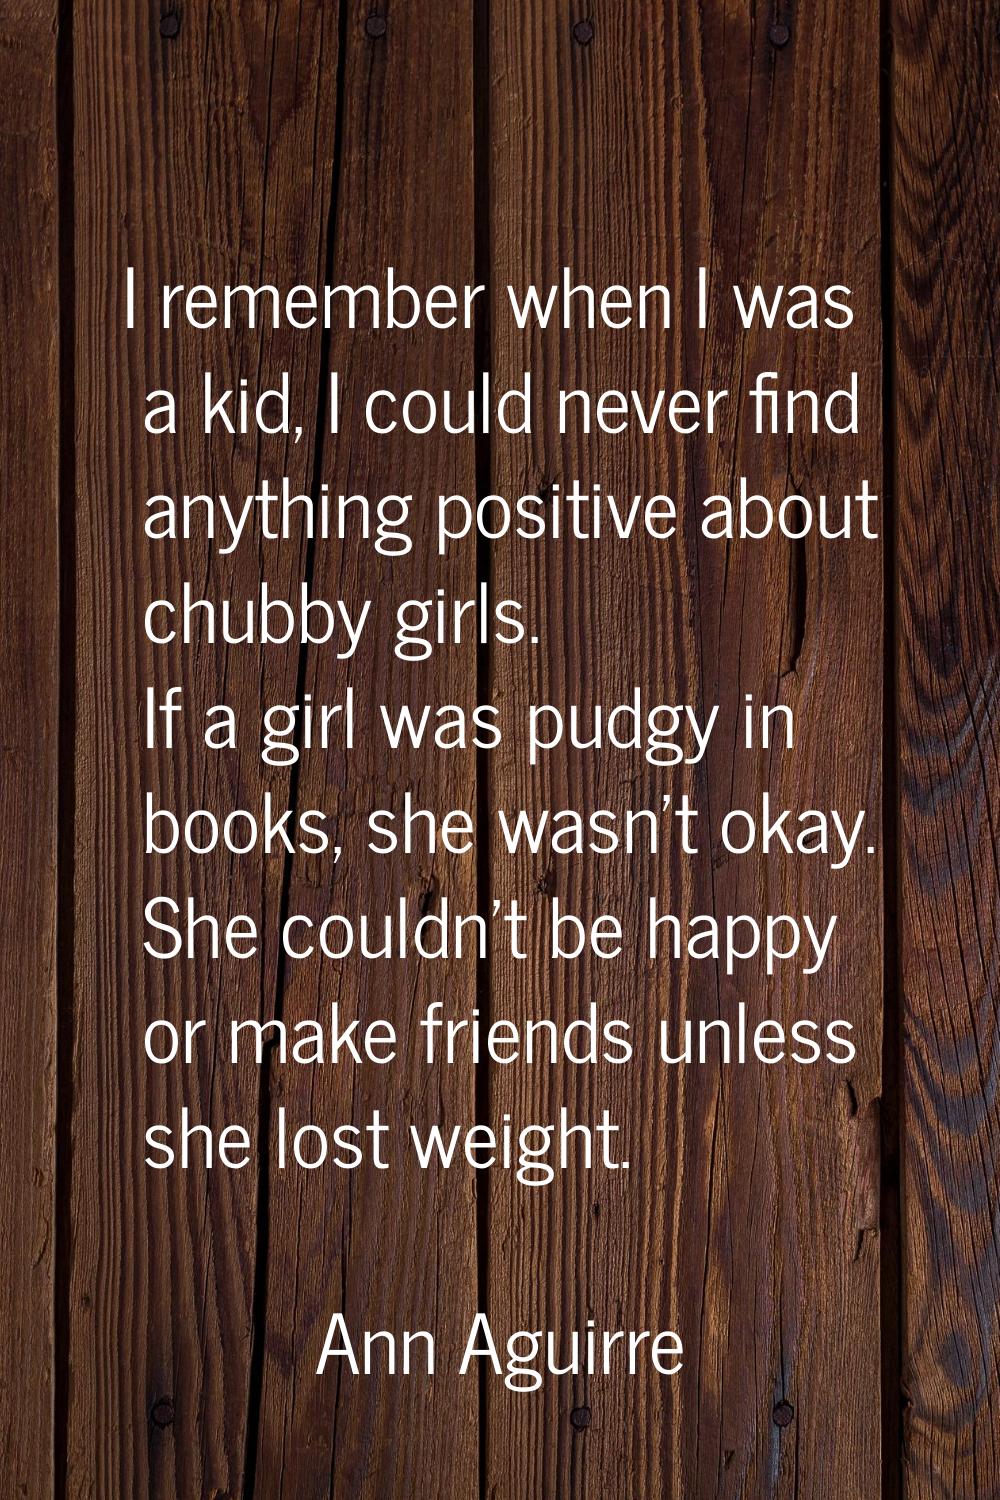 I remember when I was a kid, I could never find anything positive about chubby girls. If a girl was